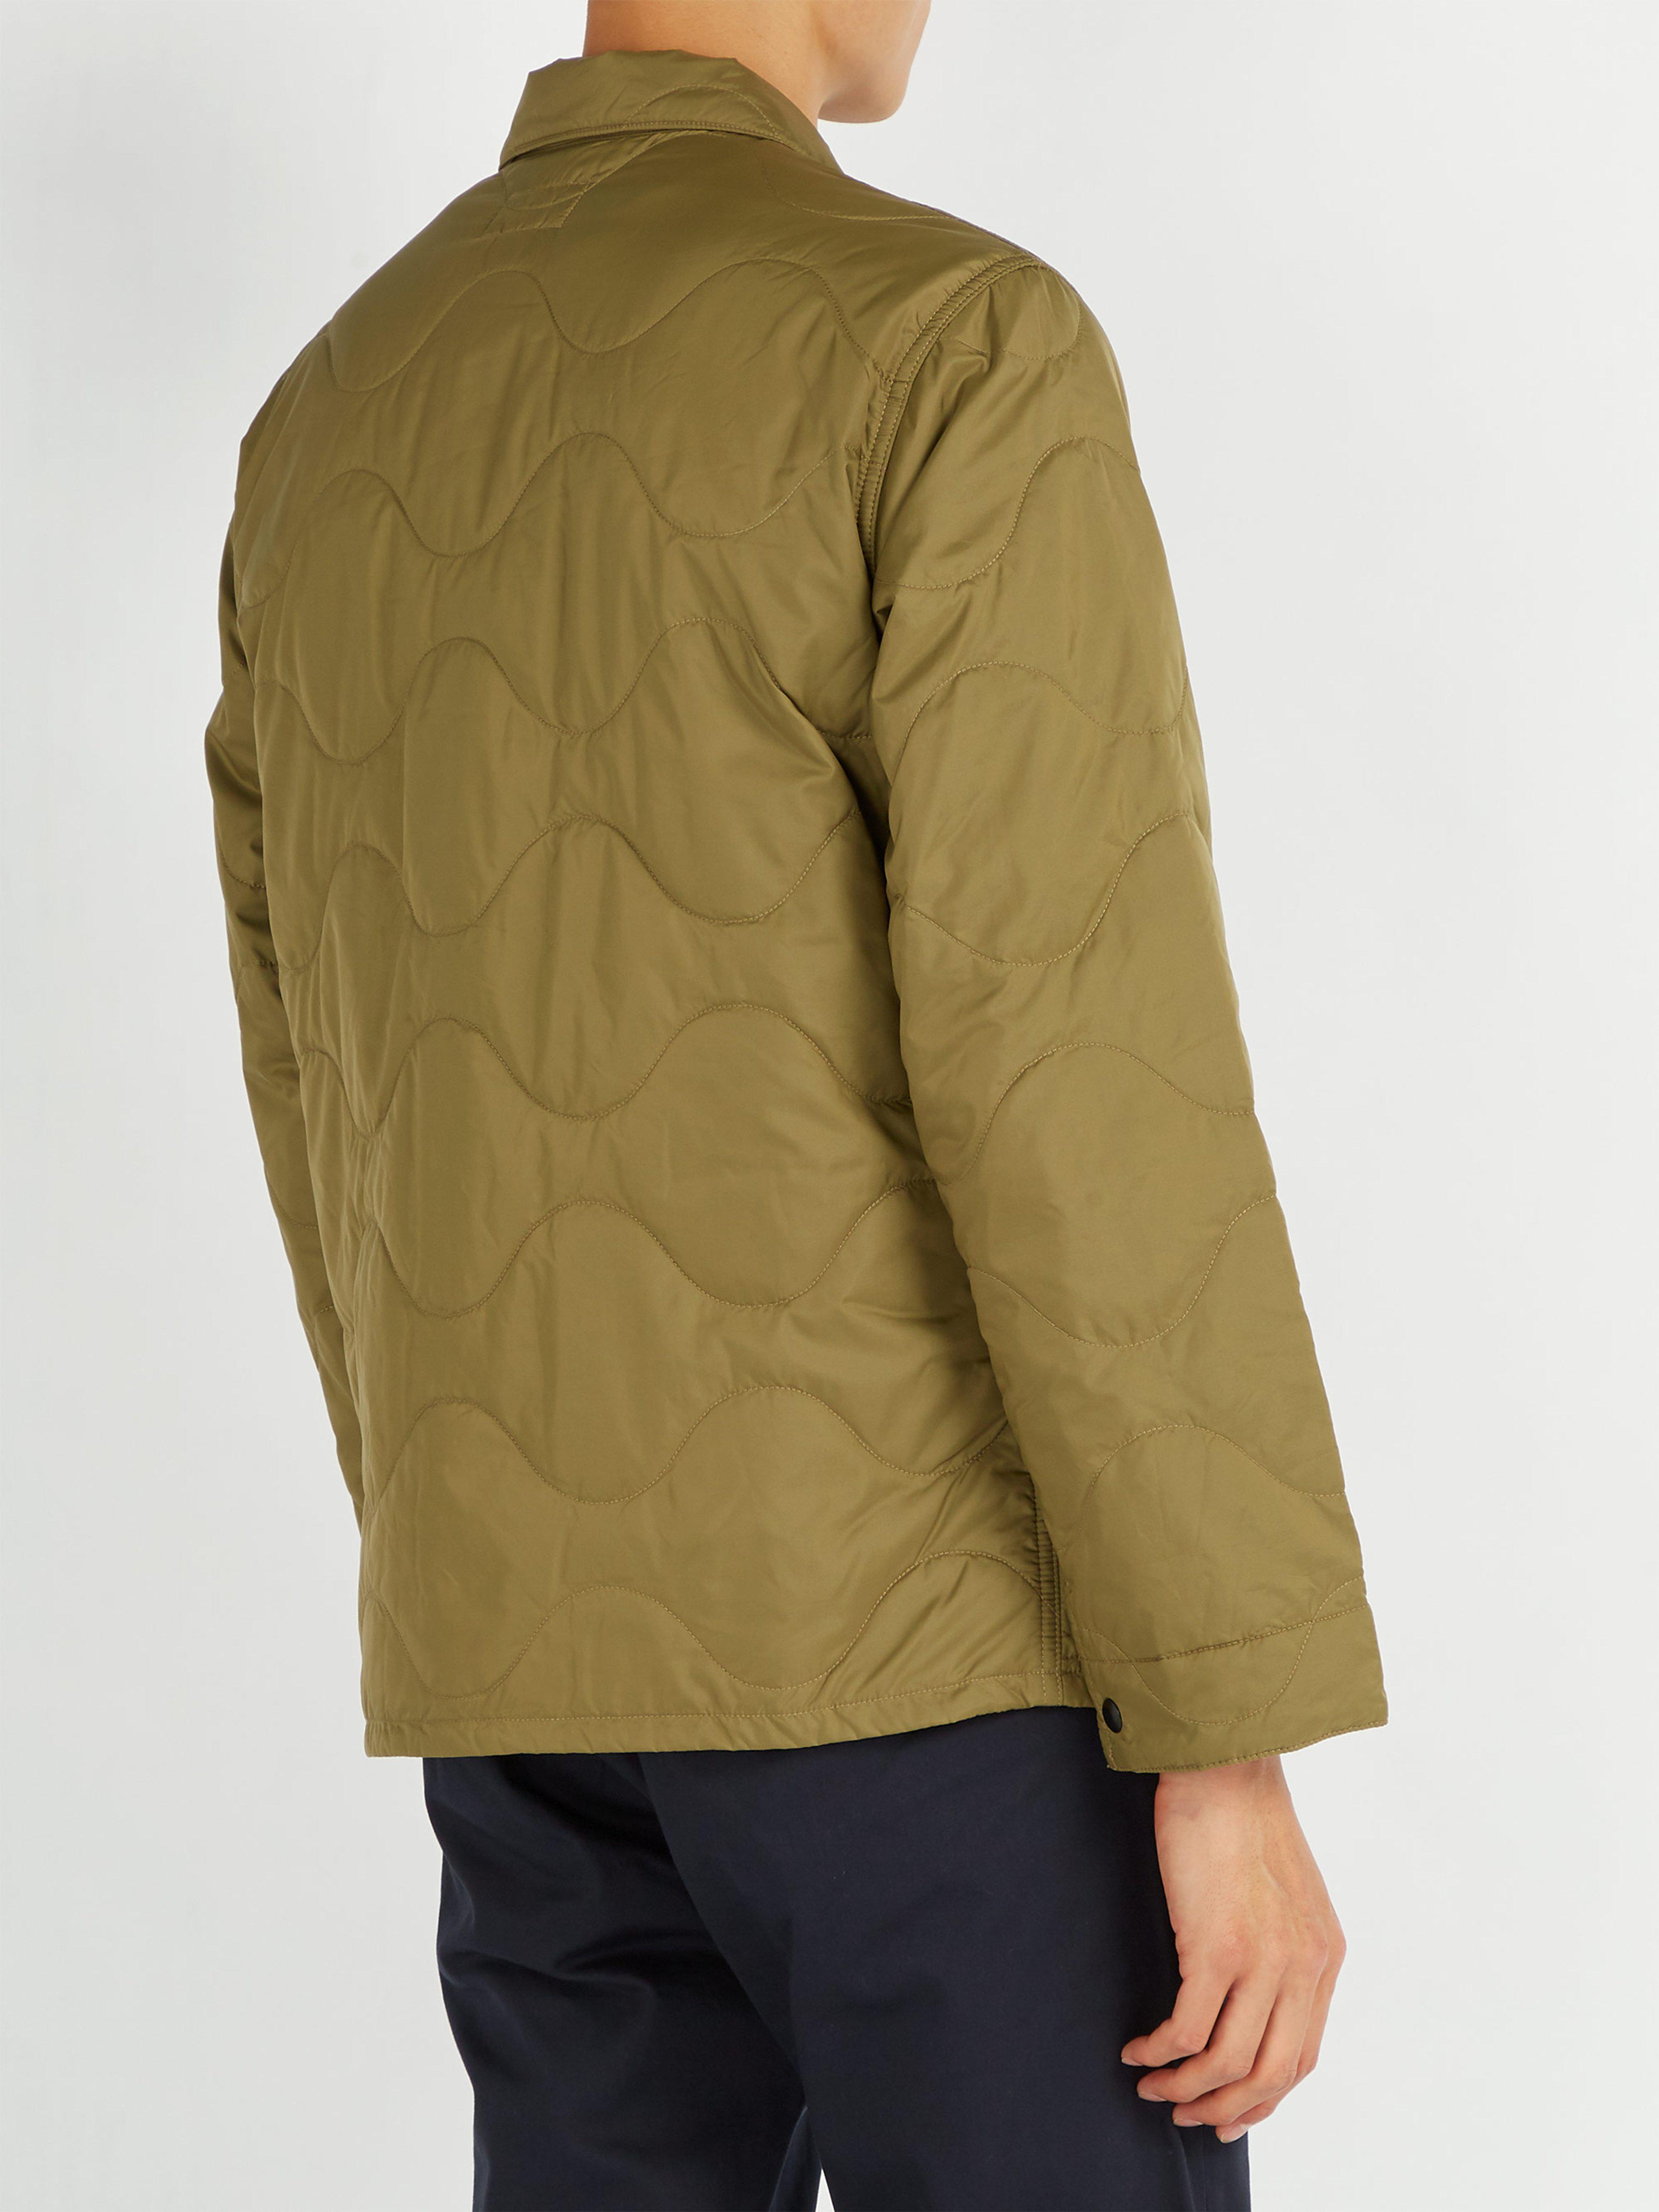 rrl quilted chore jacket \u003e Up to 69 